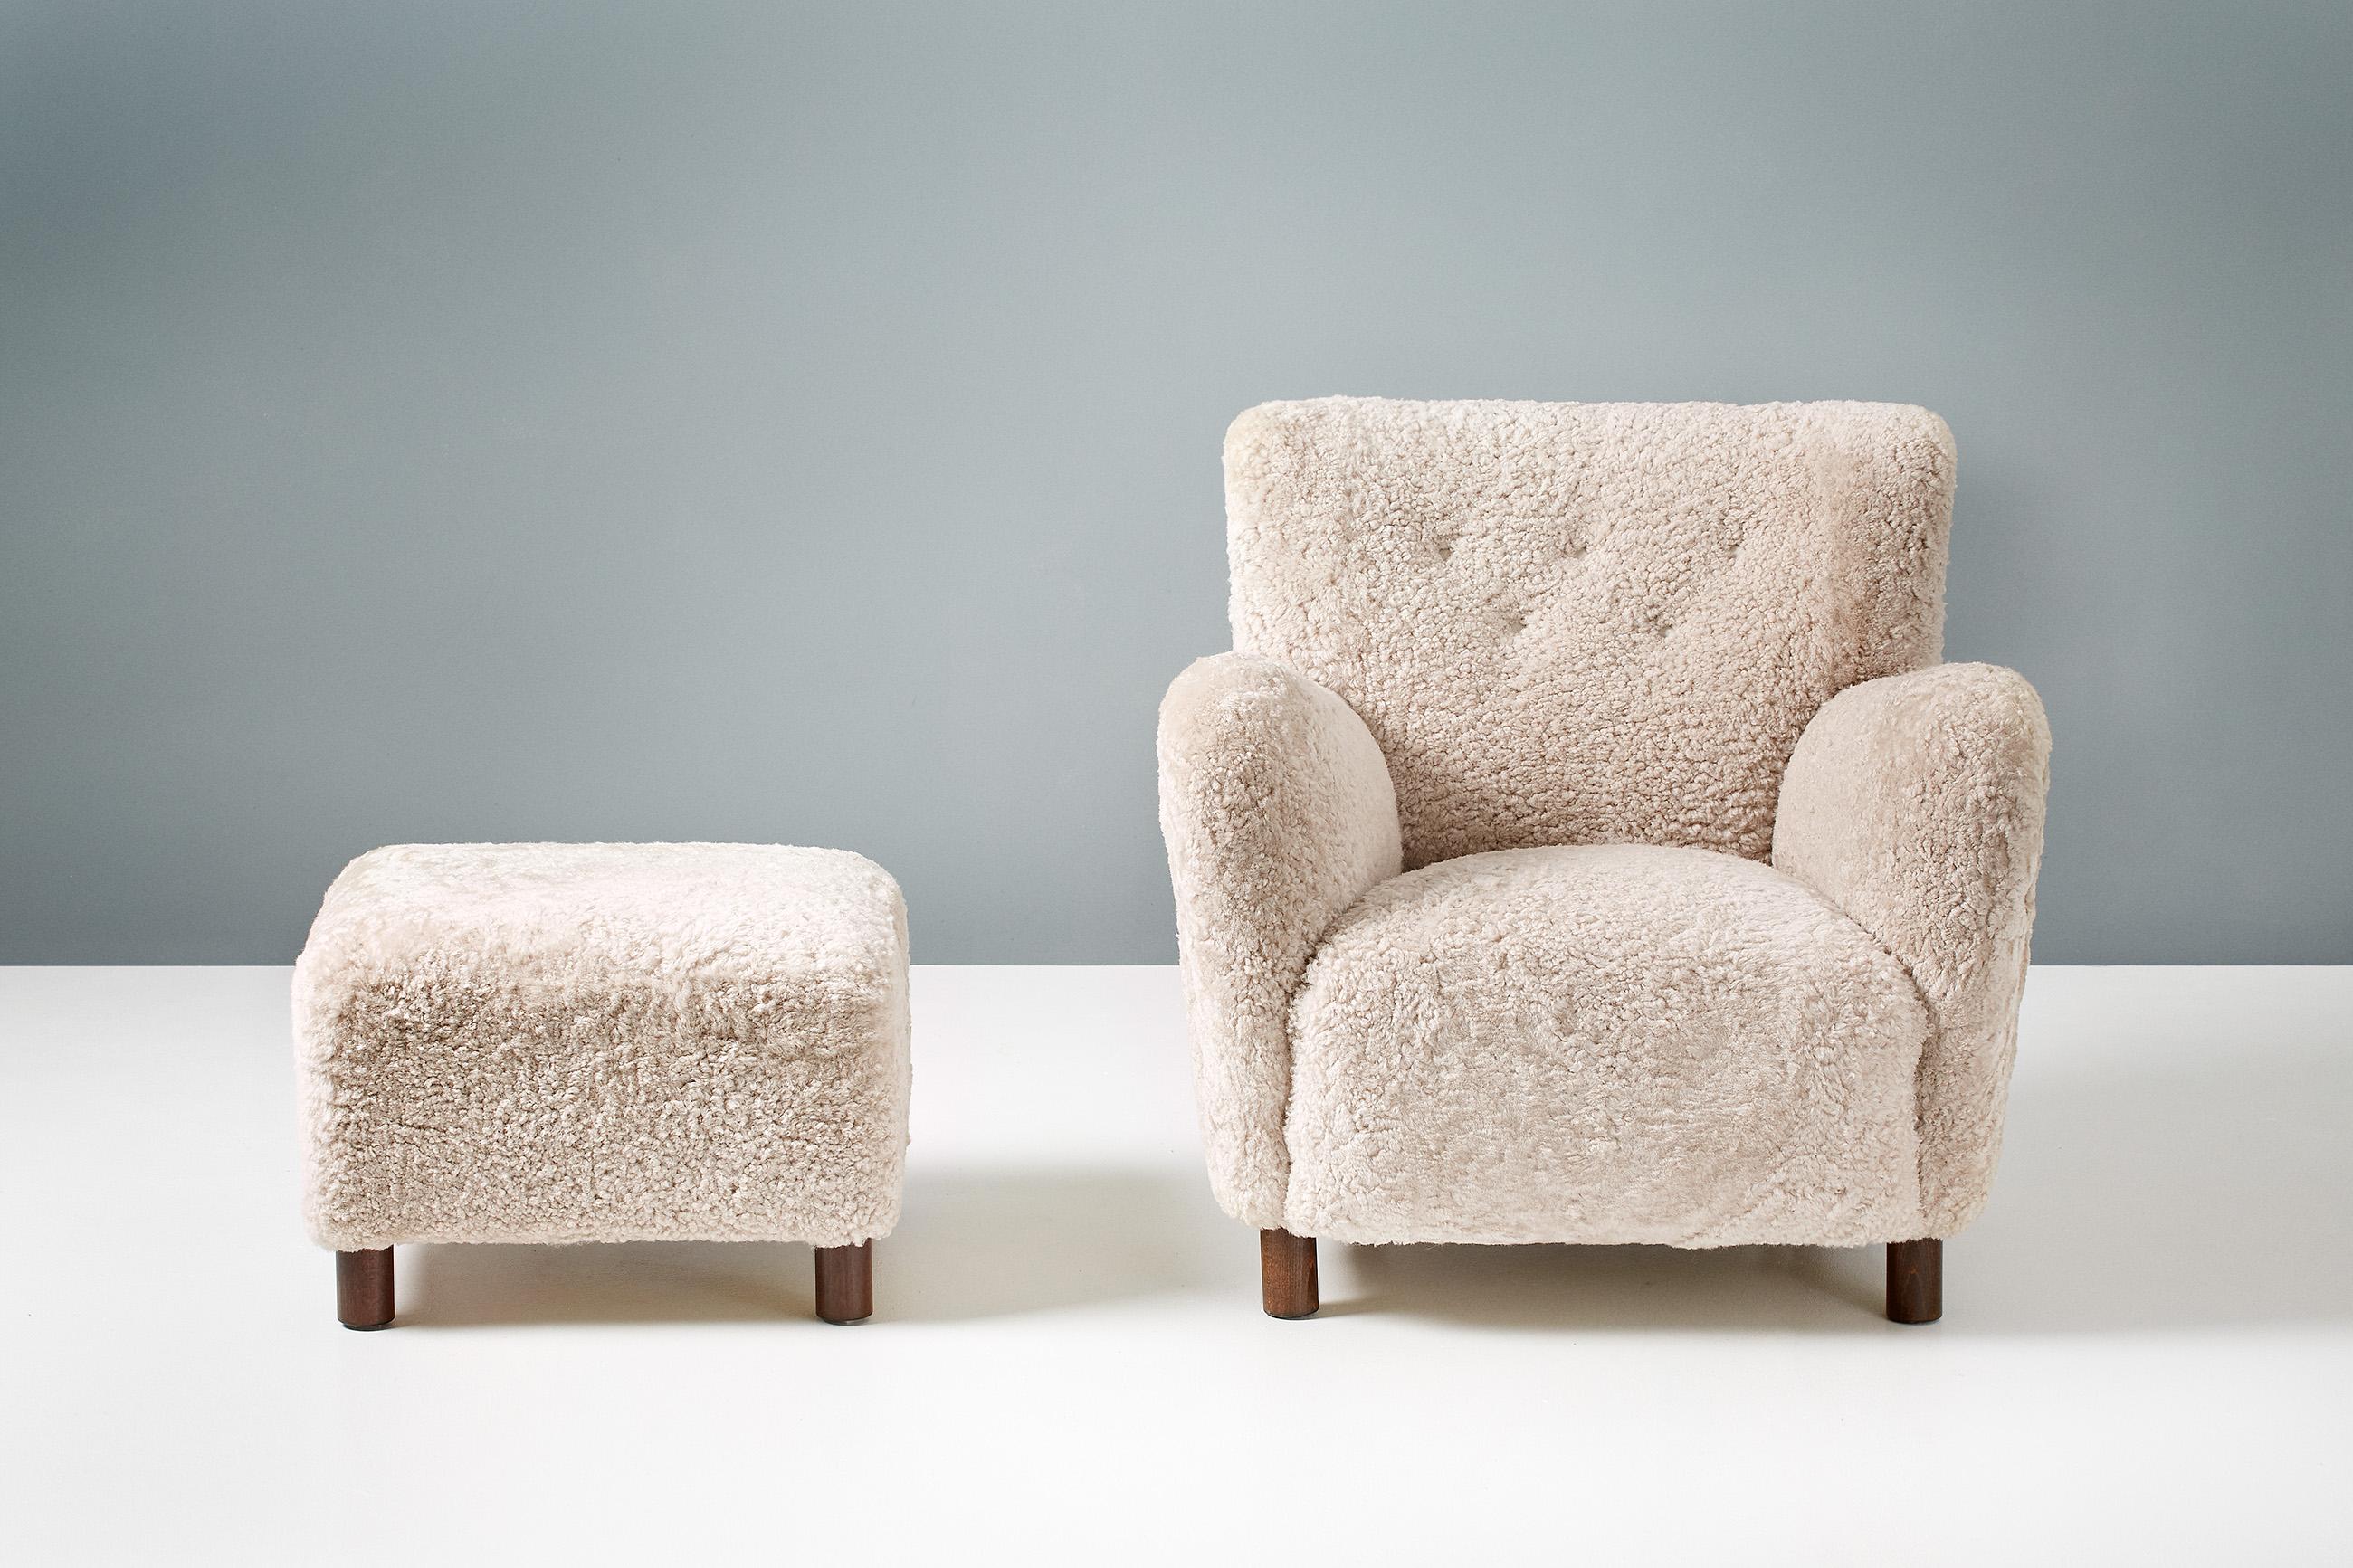 Dagmar Design - model 54 lounge chair & ottoman set

The Model 54 chair & ottoman is from our custom-made upholstered range. This piece has been developed and hand-made at our workshops in London using the highest quality materials. The frame is